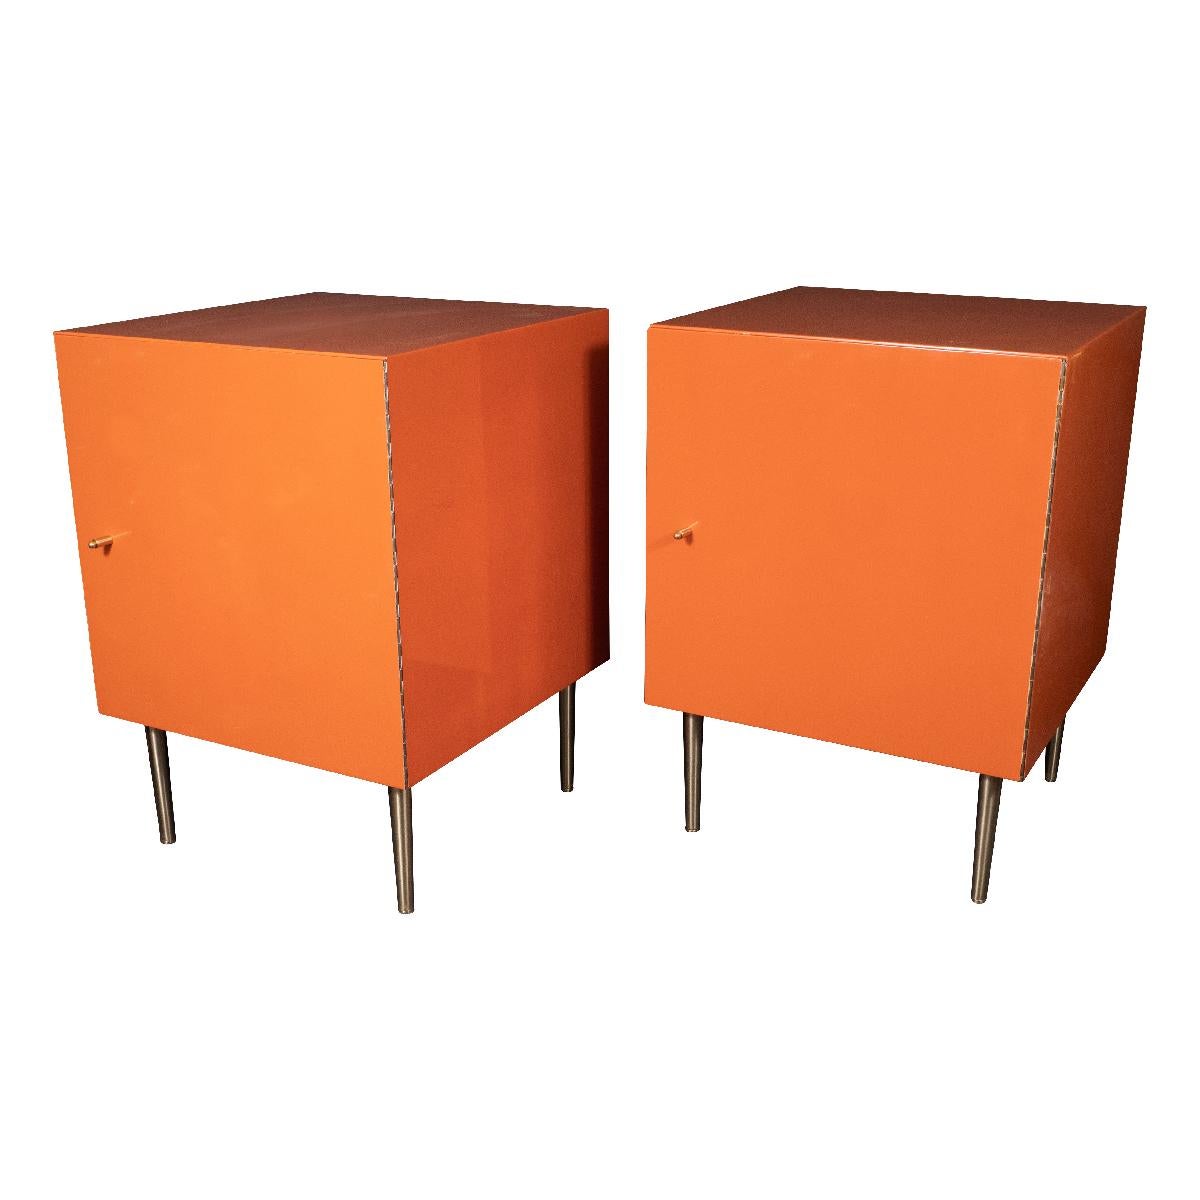 Pair of orange, painted wood cabinets with brass pulls, tapered brass legs and mirrored interiors. Some minor chips in paint finish on face and near hinge.